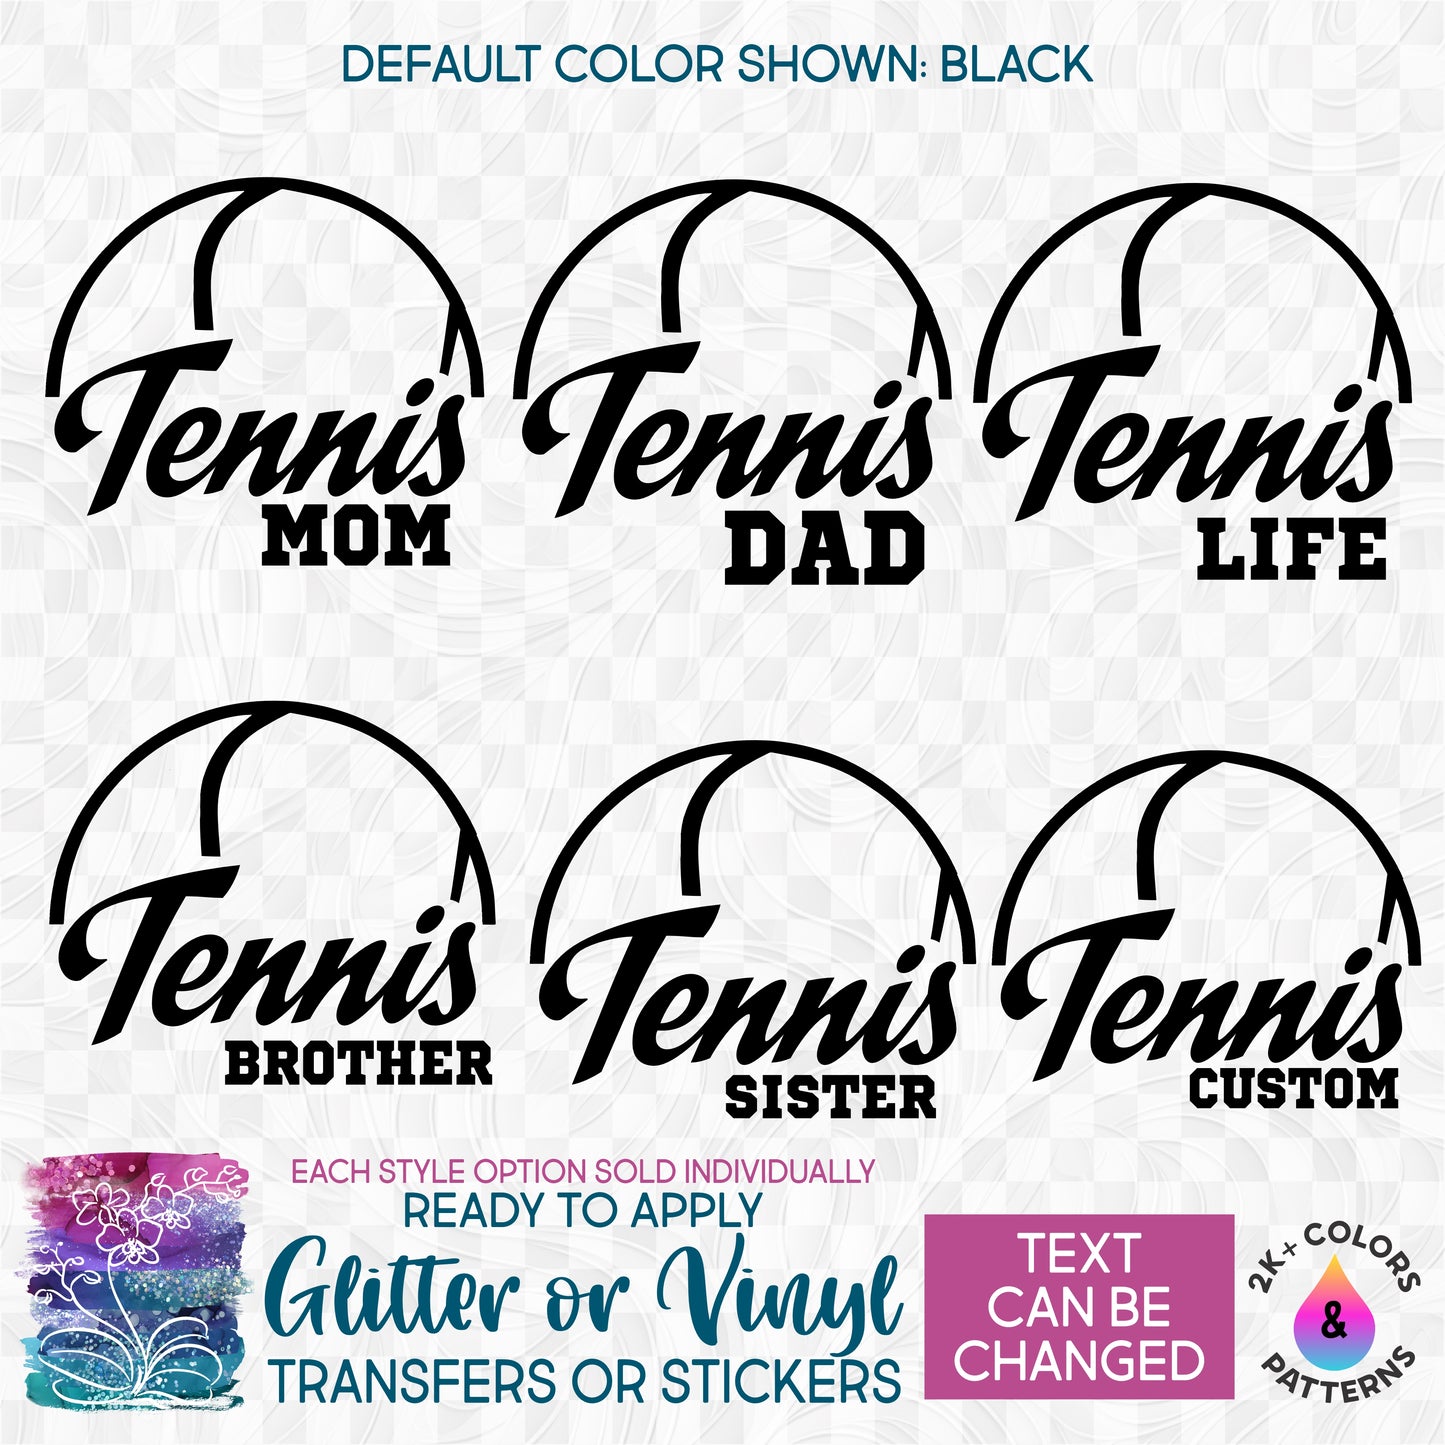 Tennis Family Mom Made-to-Order Iron-On Transfer or Sticker